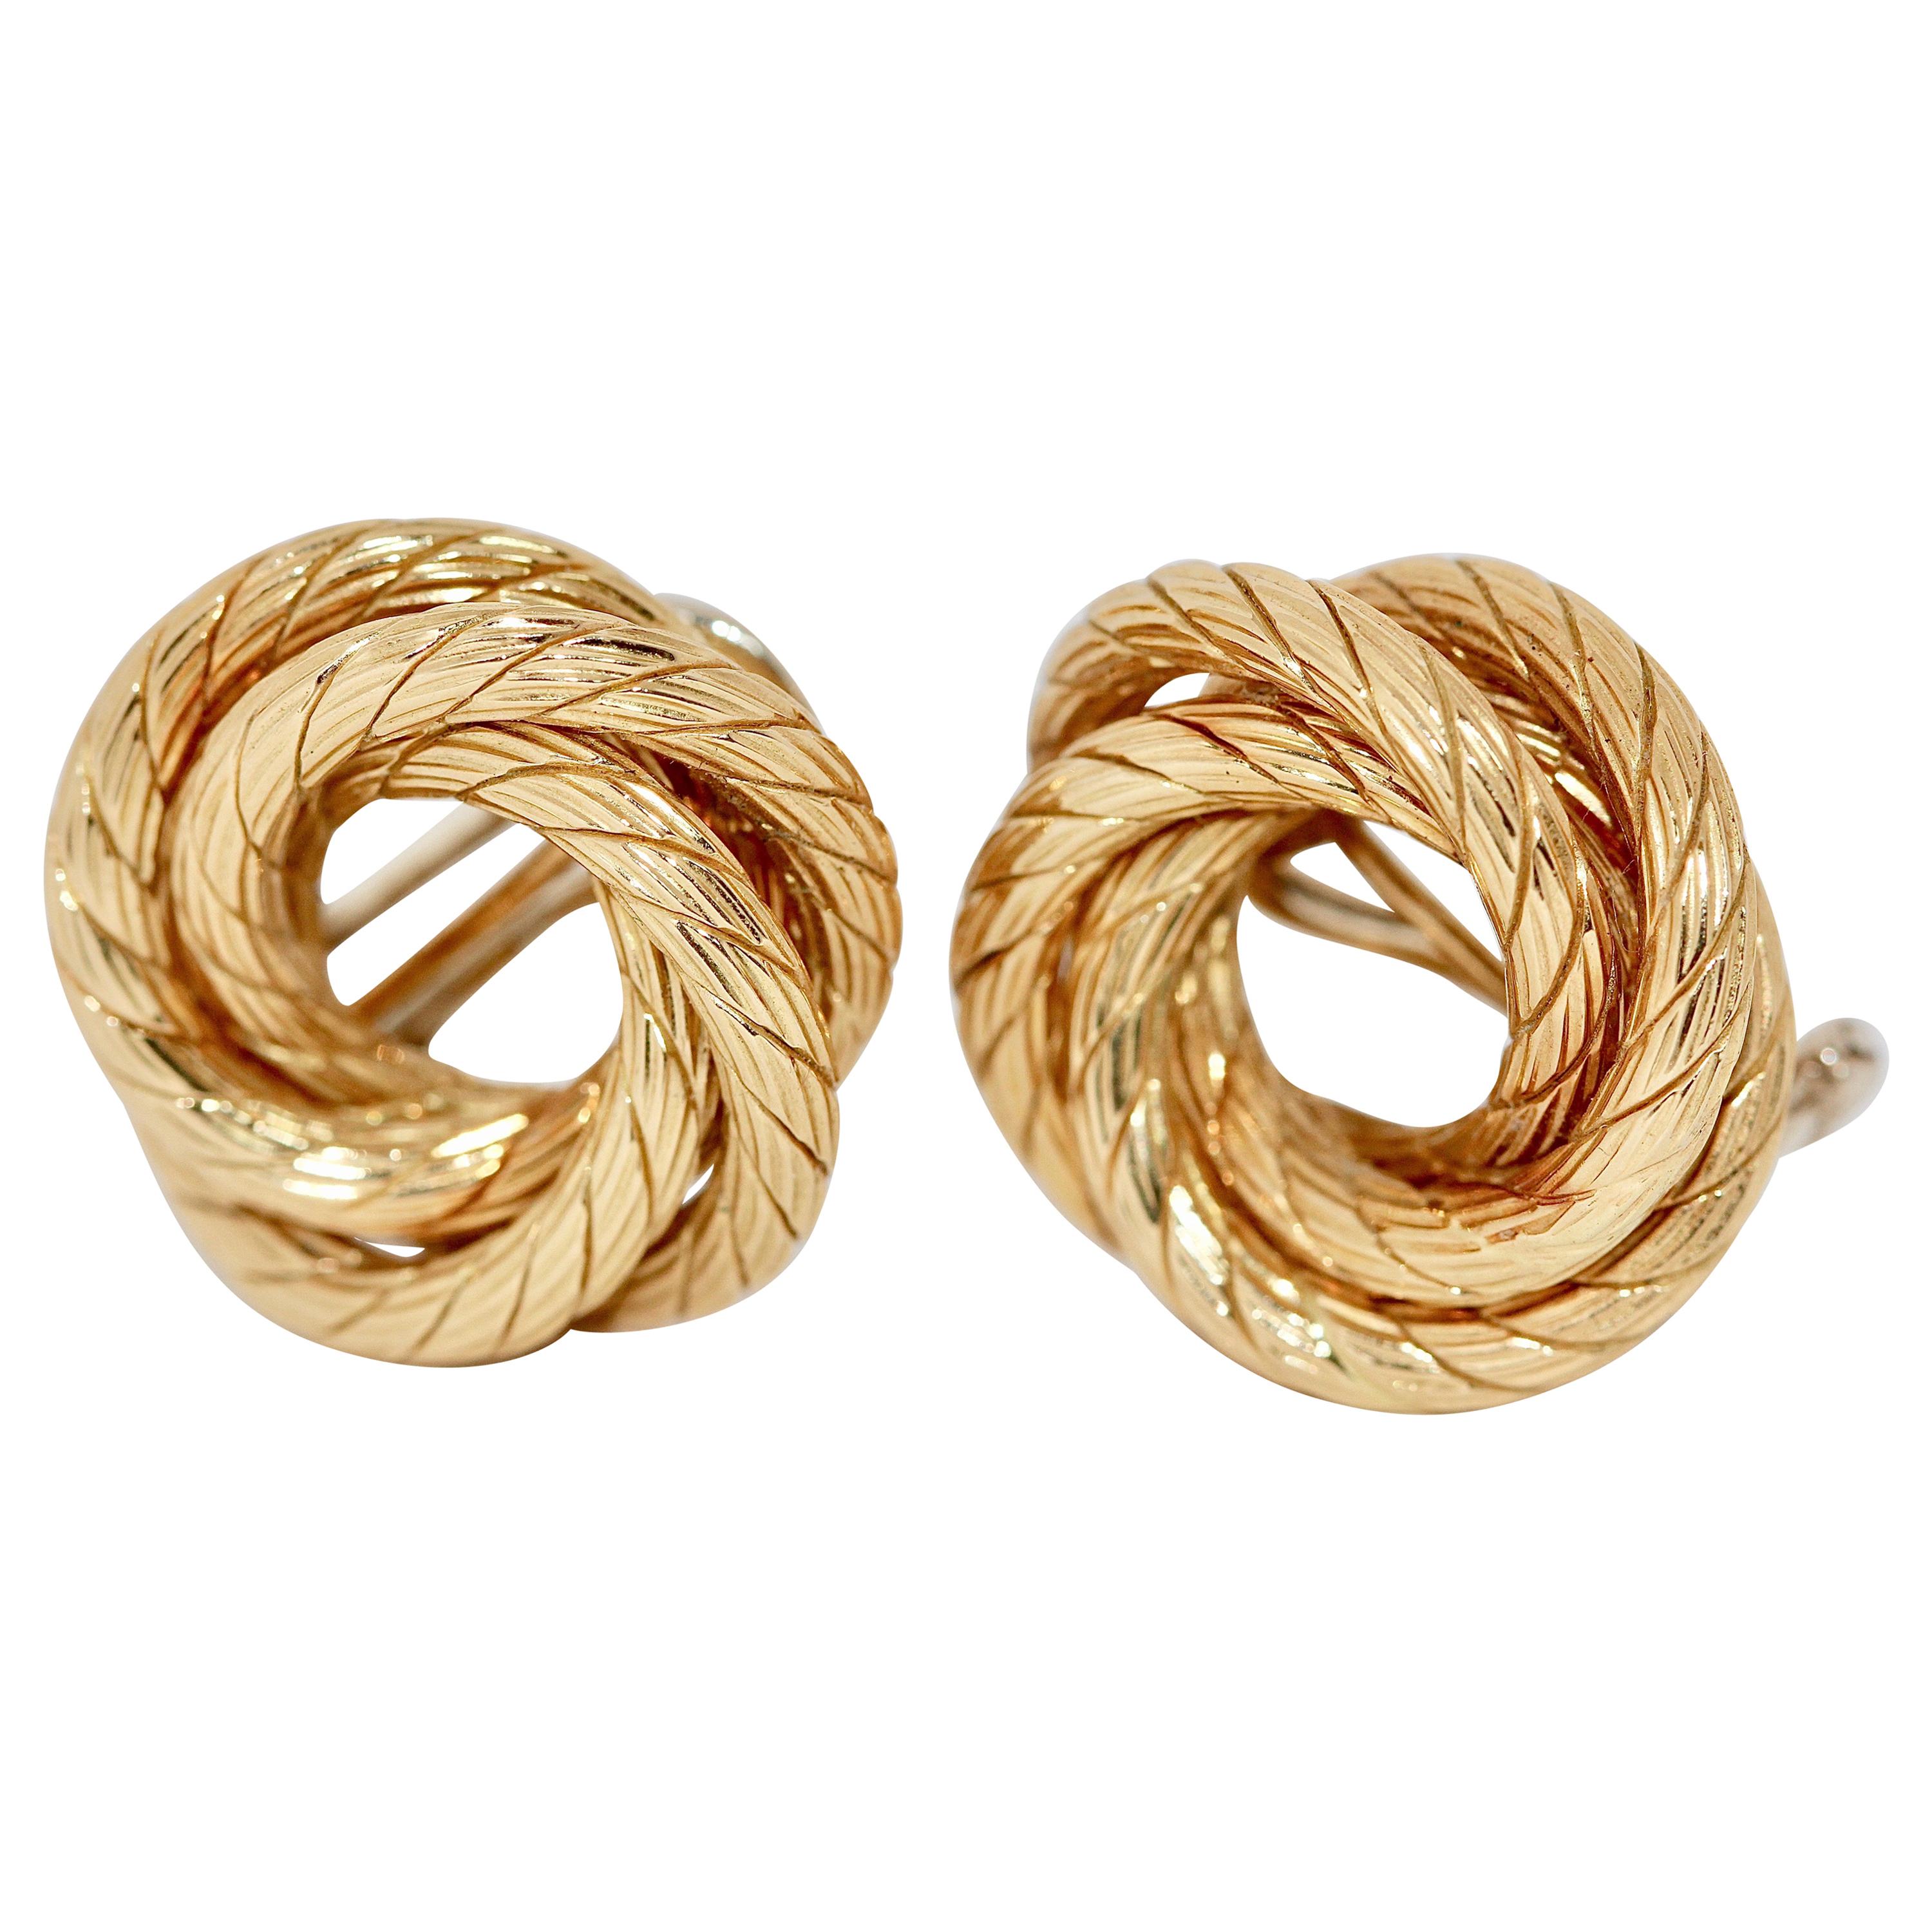 Enchanting Ladies Earrings in Spiral Design, 18 Karat Gold by Carlo Weingrill For Sale